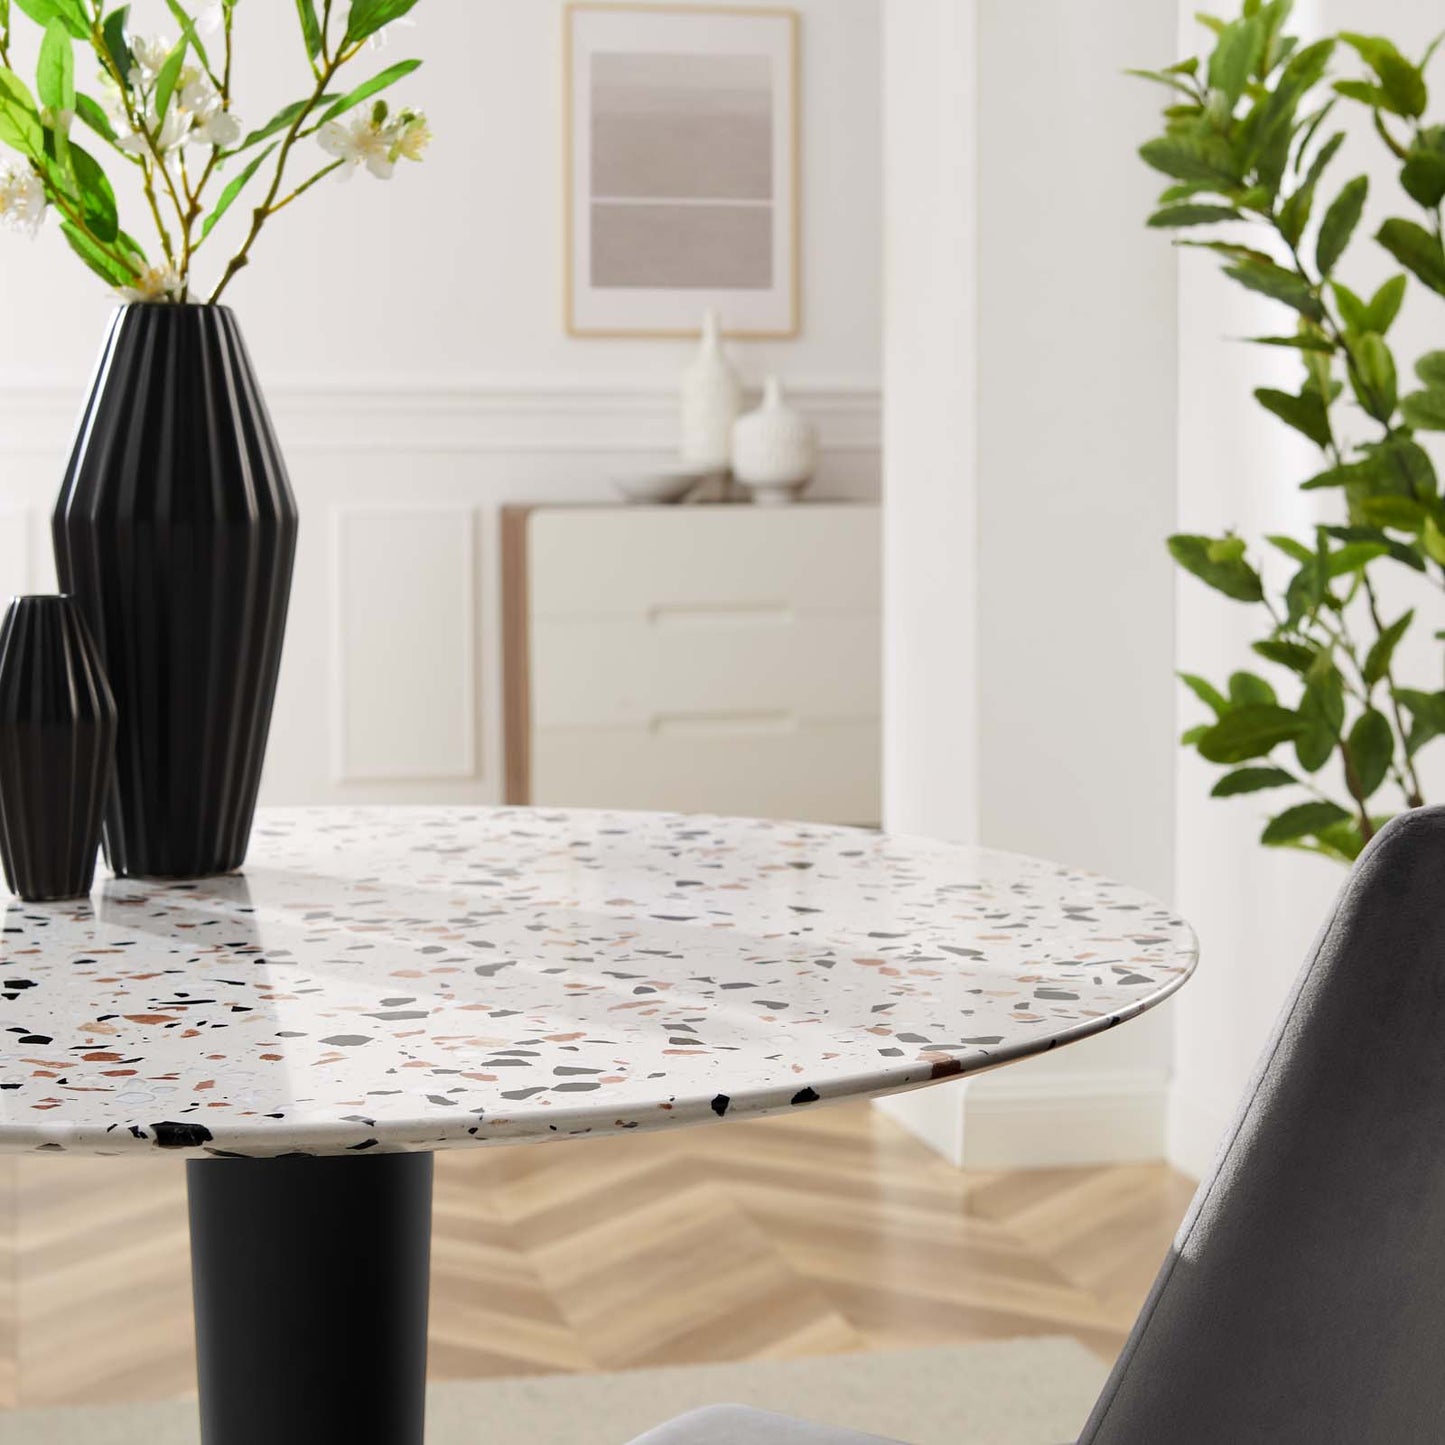 Zinque 36" Round Terrazzo Dining Table Gold White EEI-5718-GLD-WHI